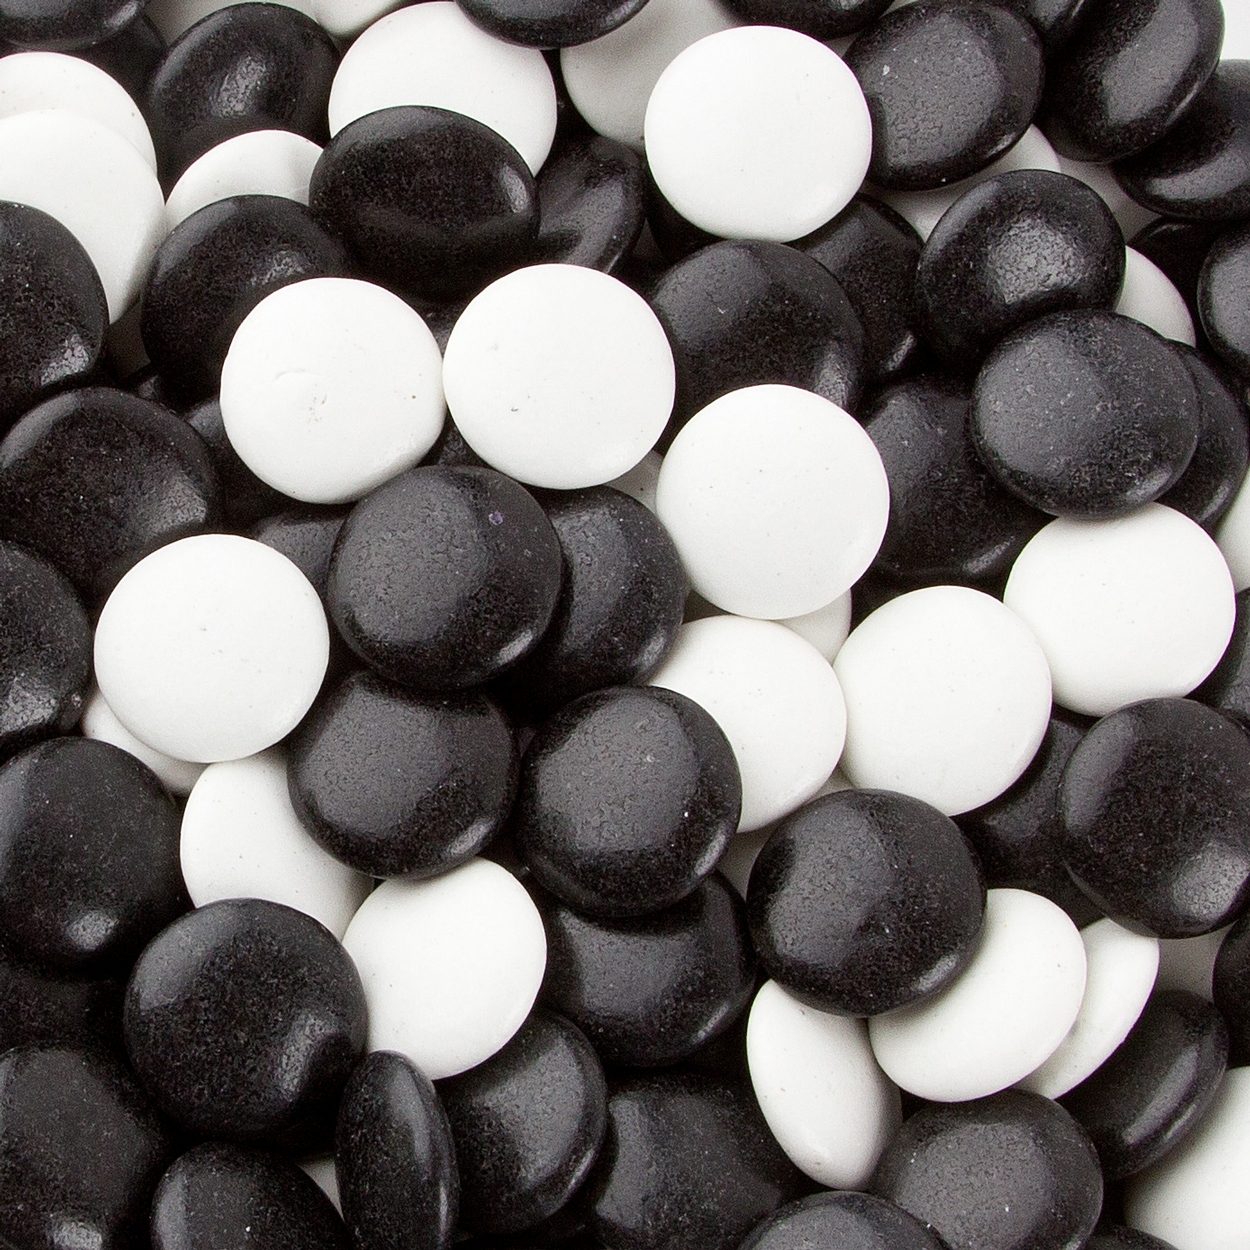 black and white m&ms